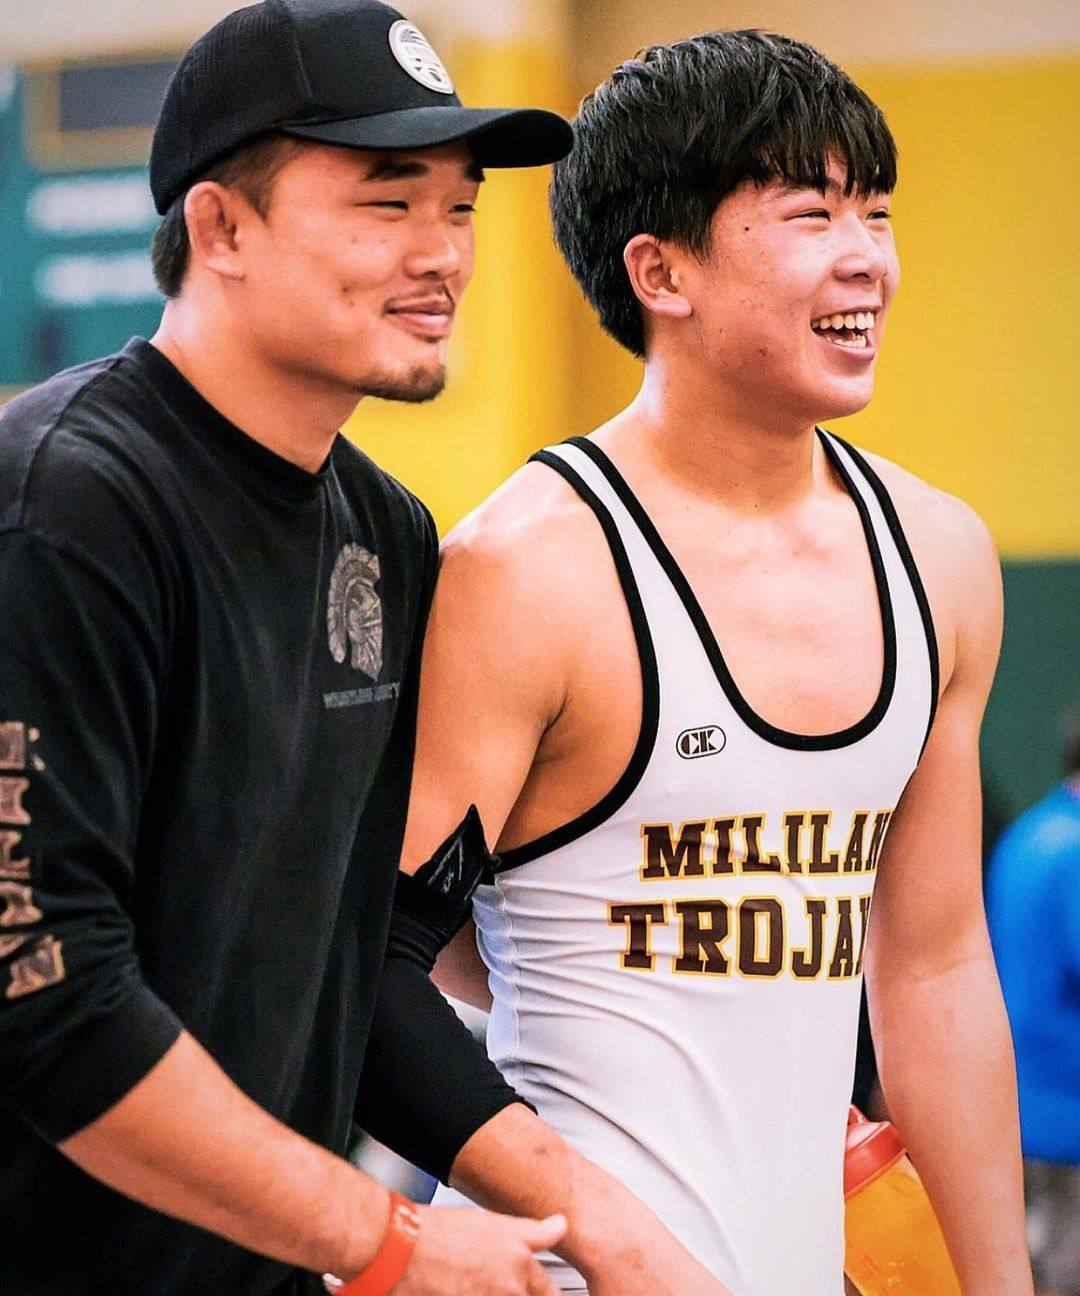 Adrian Lee with his brother Christian Lee (left) at the OIA Championships. Photo: Instagram/@adrianleemma